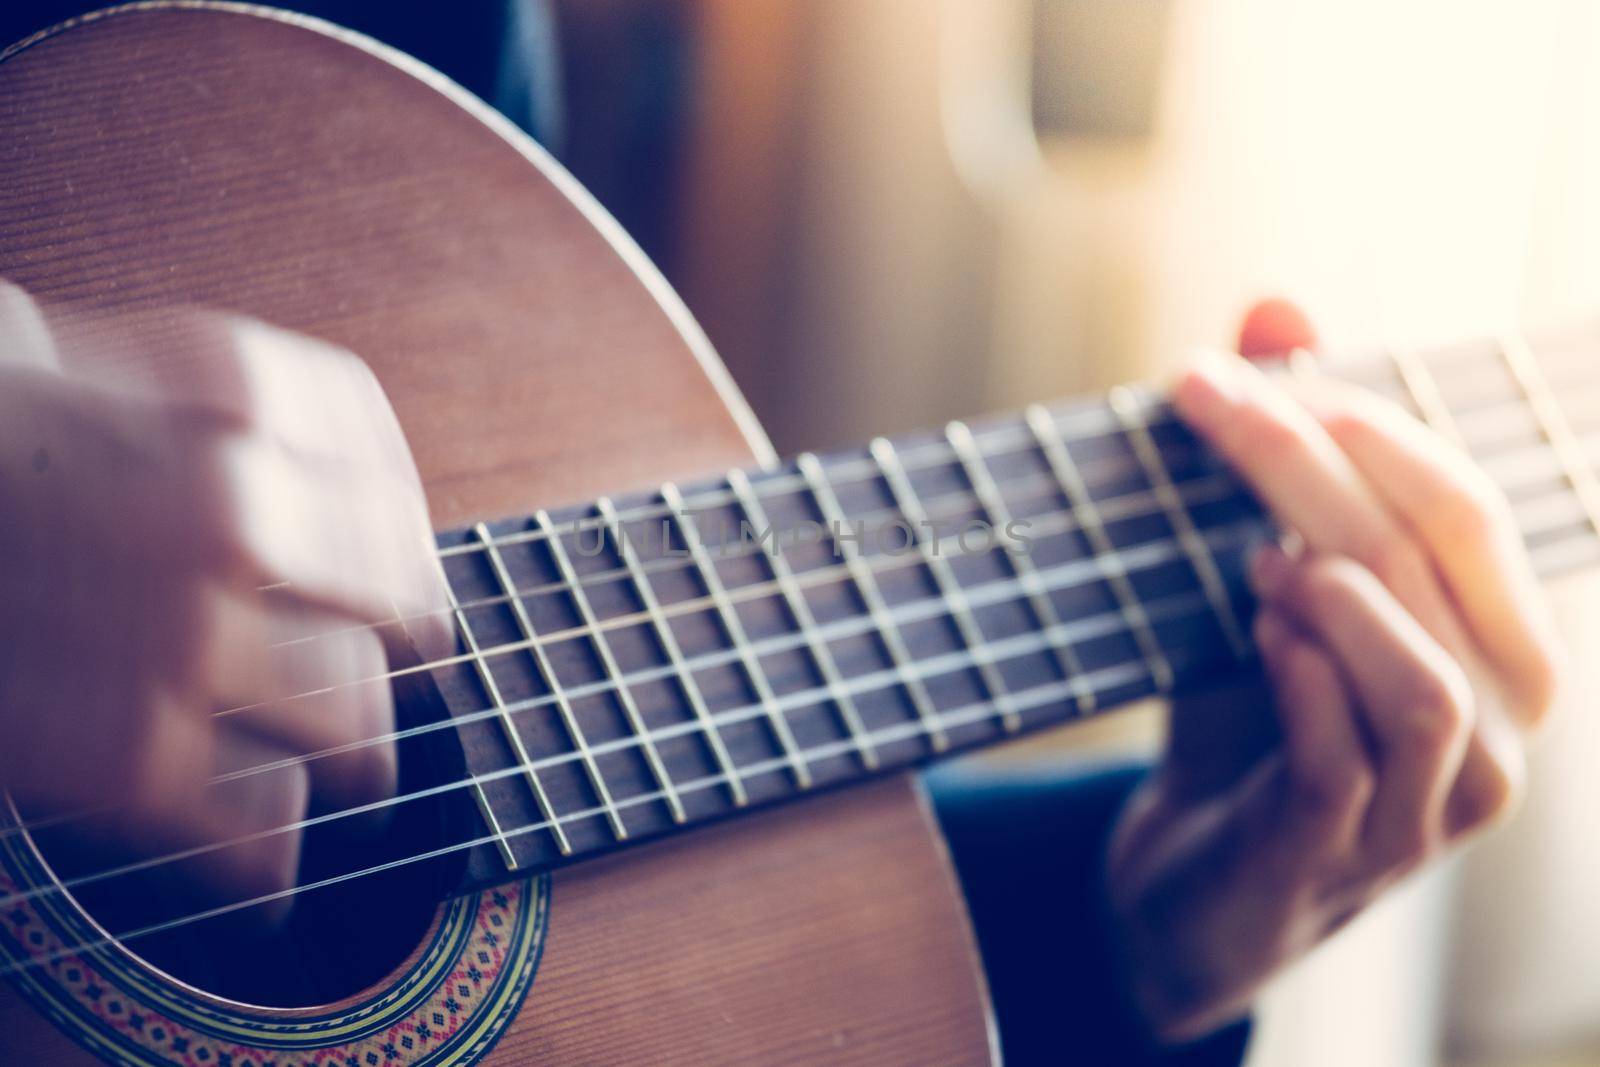 Musician plays a classical guitar, blurry hands, fretboard and fingers